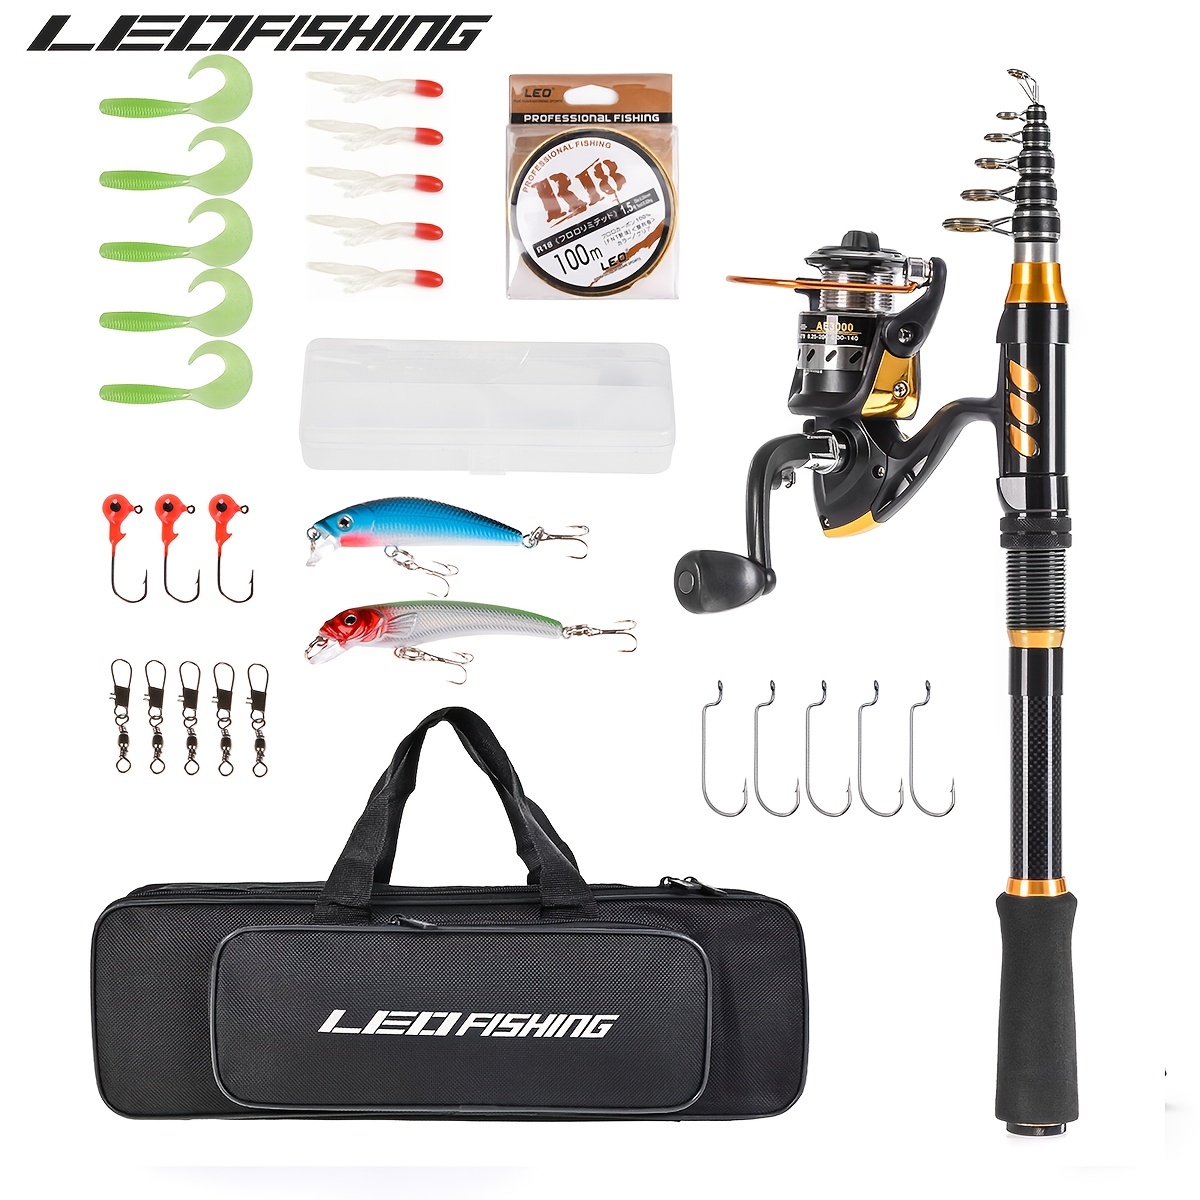 LEOFISHING Portable Telescopic Fishing Rod And Reel Combos Set, Carbon  Fiber Fishing Pole With Full Kits Carrier Bag For Beginner And Youth, For